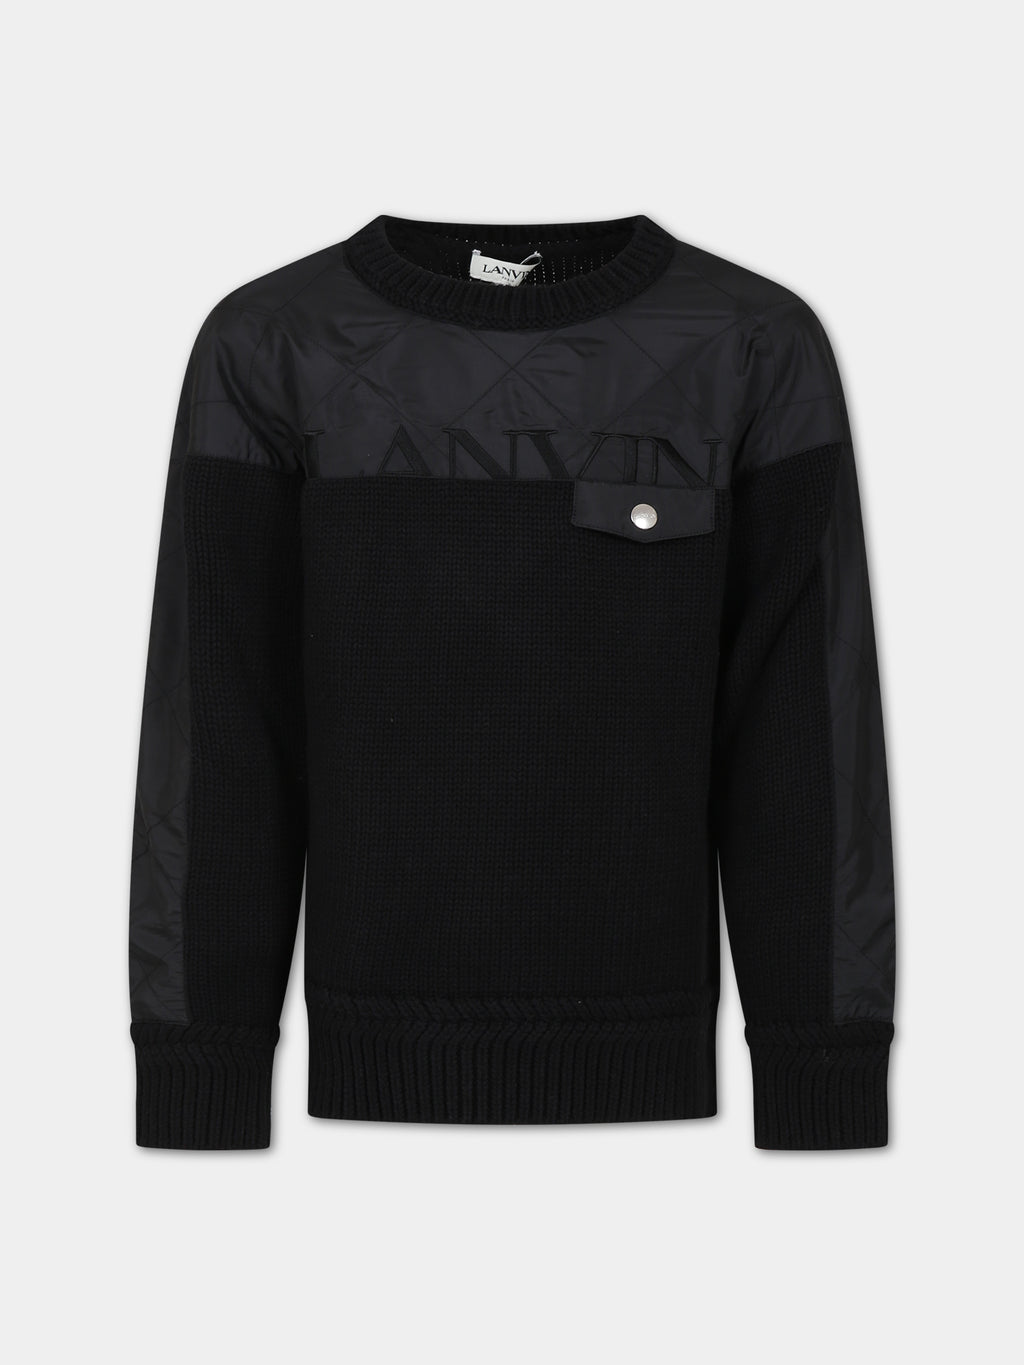 Black sweater with logo for boy